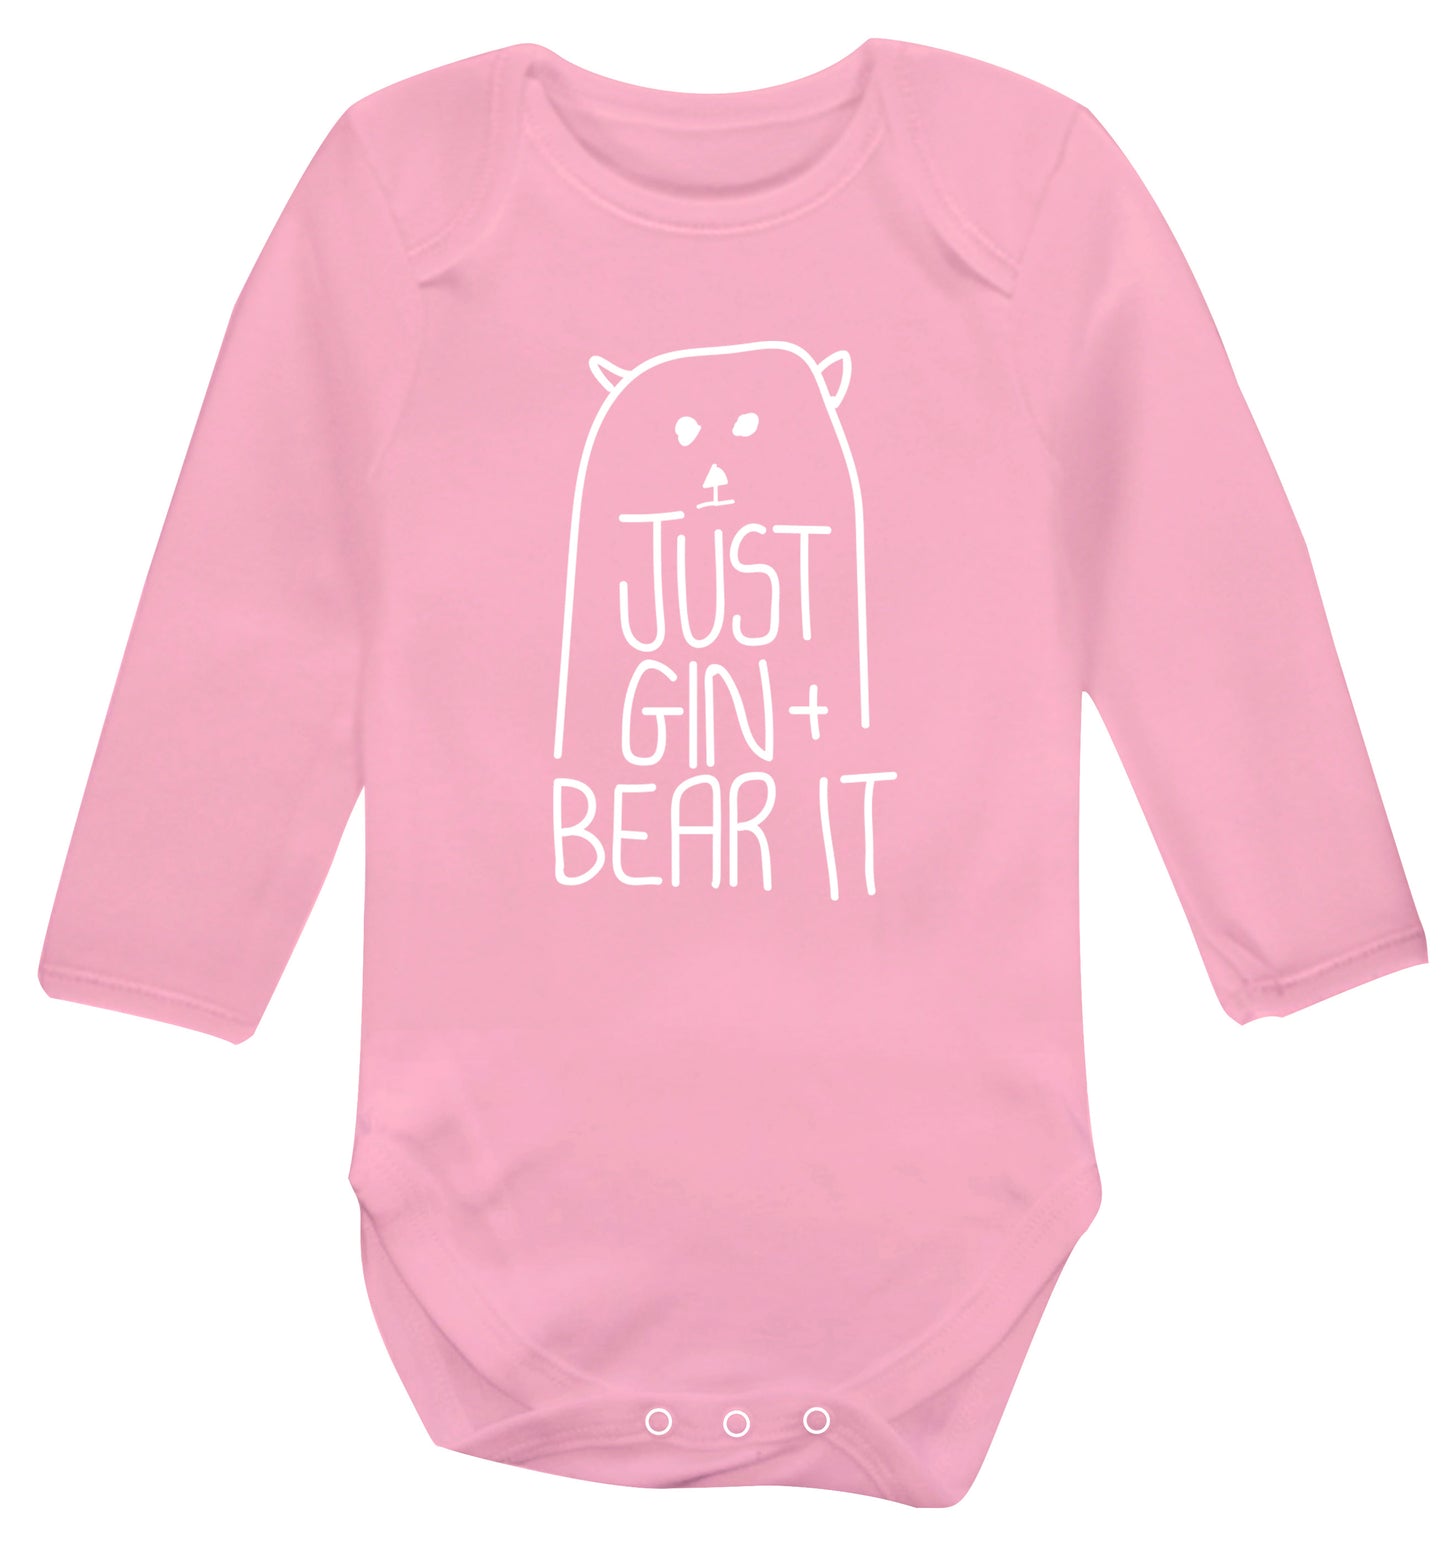 Just gin and bear it Baby Vest long sleeved pale pink 6-12 months